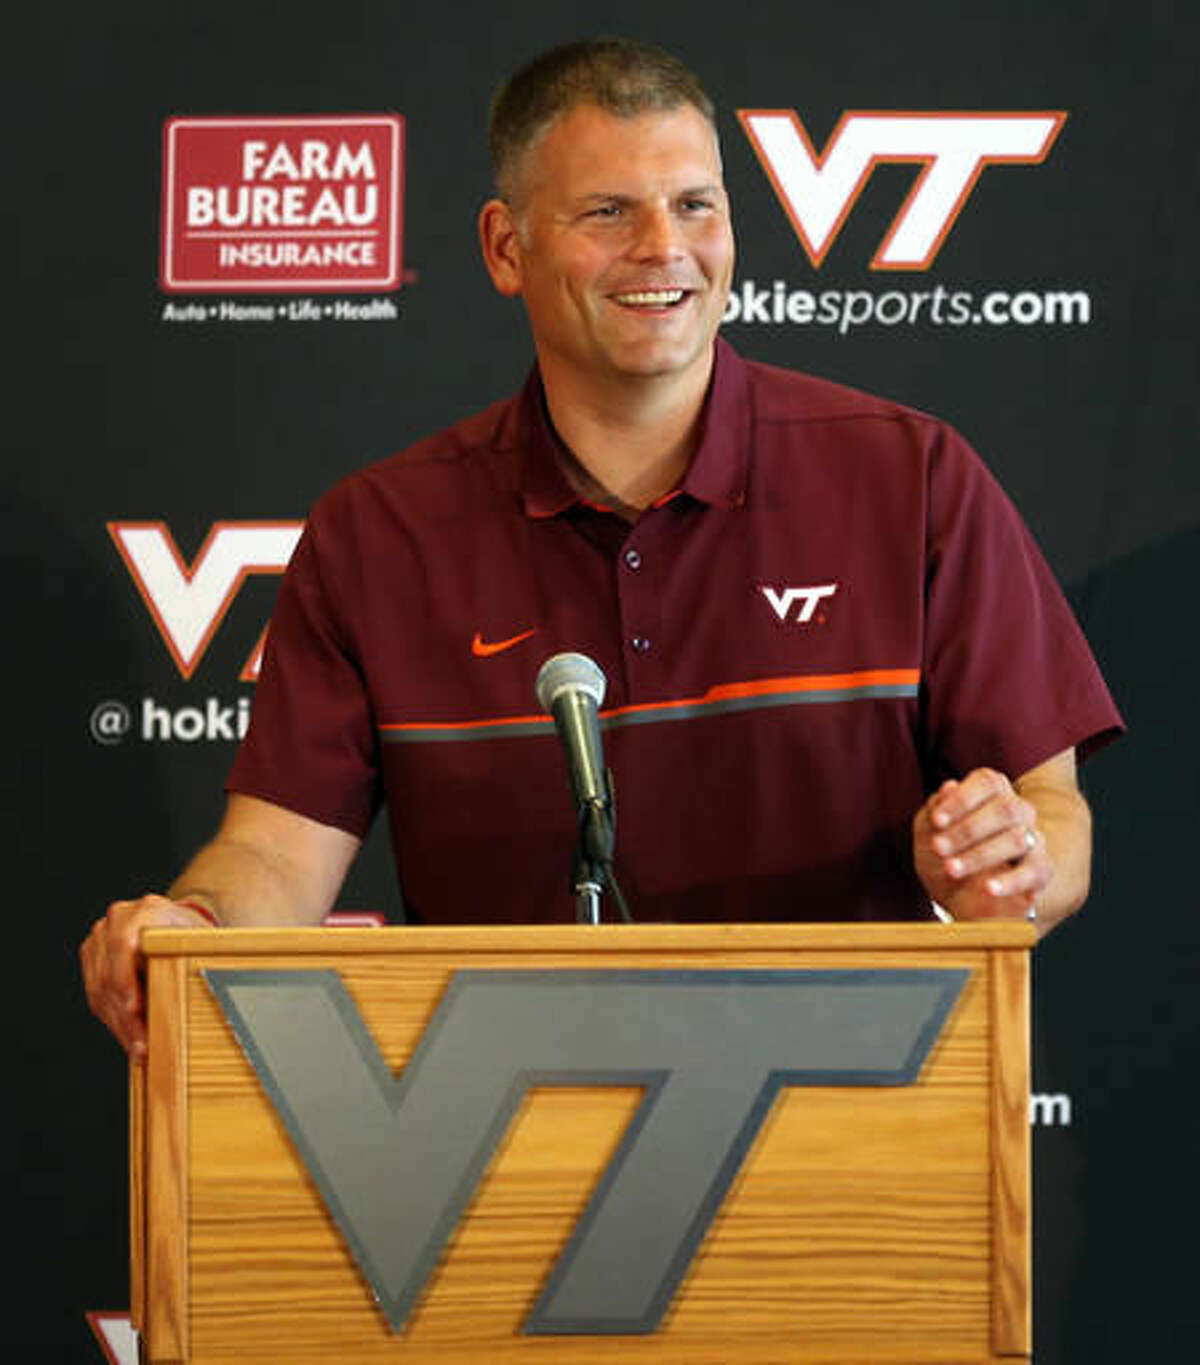 FILE - In this Aug. 2, 2016, file photo, Virginia Tech head football coach Justin Fuente addresses questions about his NCAA college football team during a preseason news conference in Blacksburg Va. Fuente has replaced longtime Hokies coach Frank Beamer. (Matt Gentry/The Roanoke Times via AP, File)